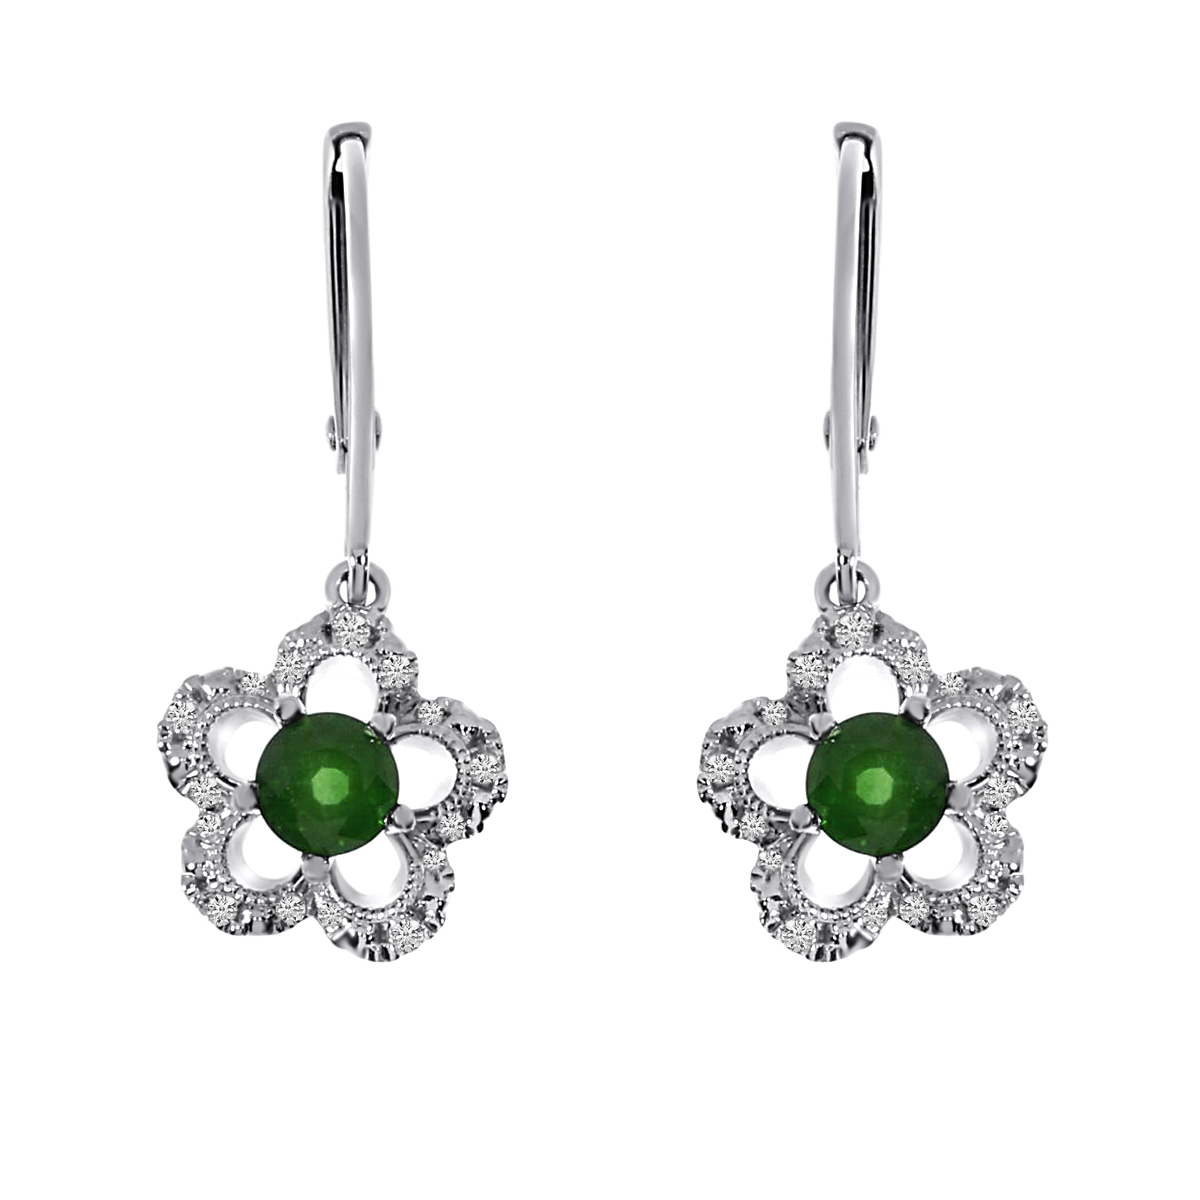 JCX2106: Floral shaped earrings in 14k white gold with 4 mm round emeralds and .11 ct diamonds.